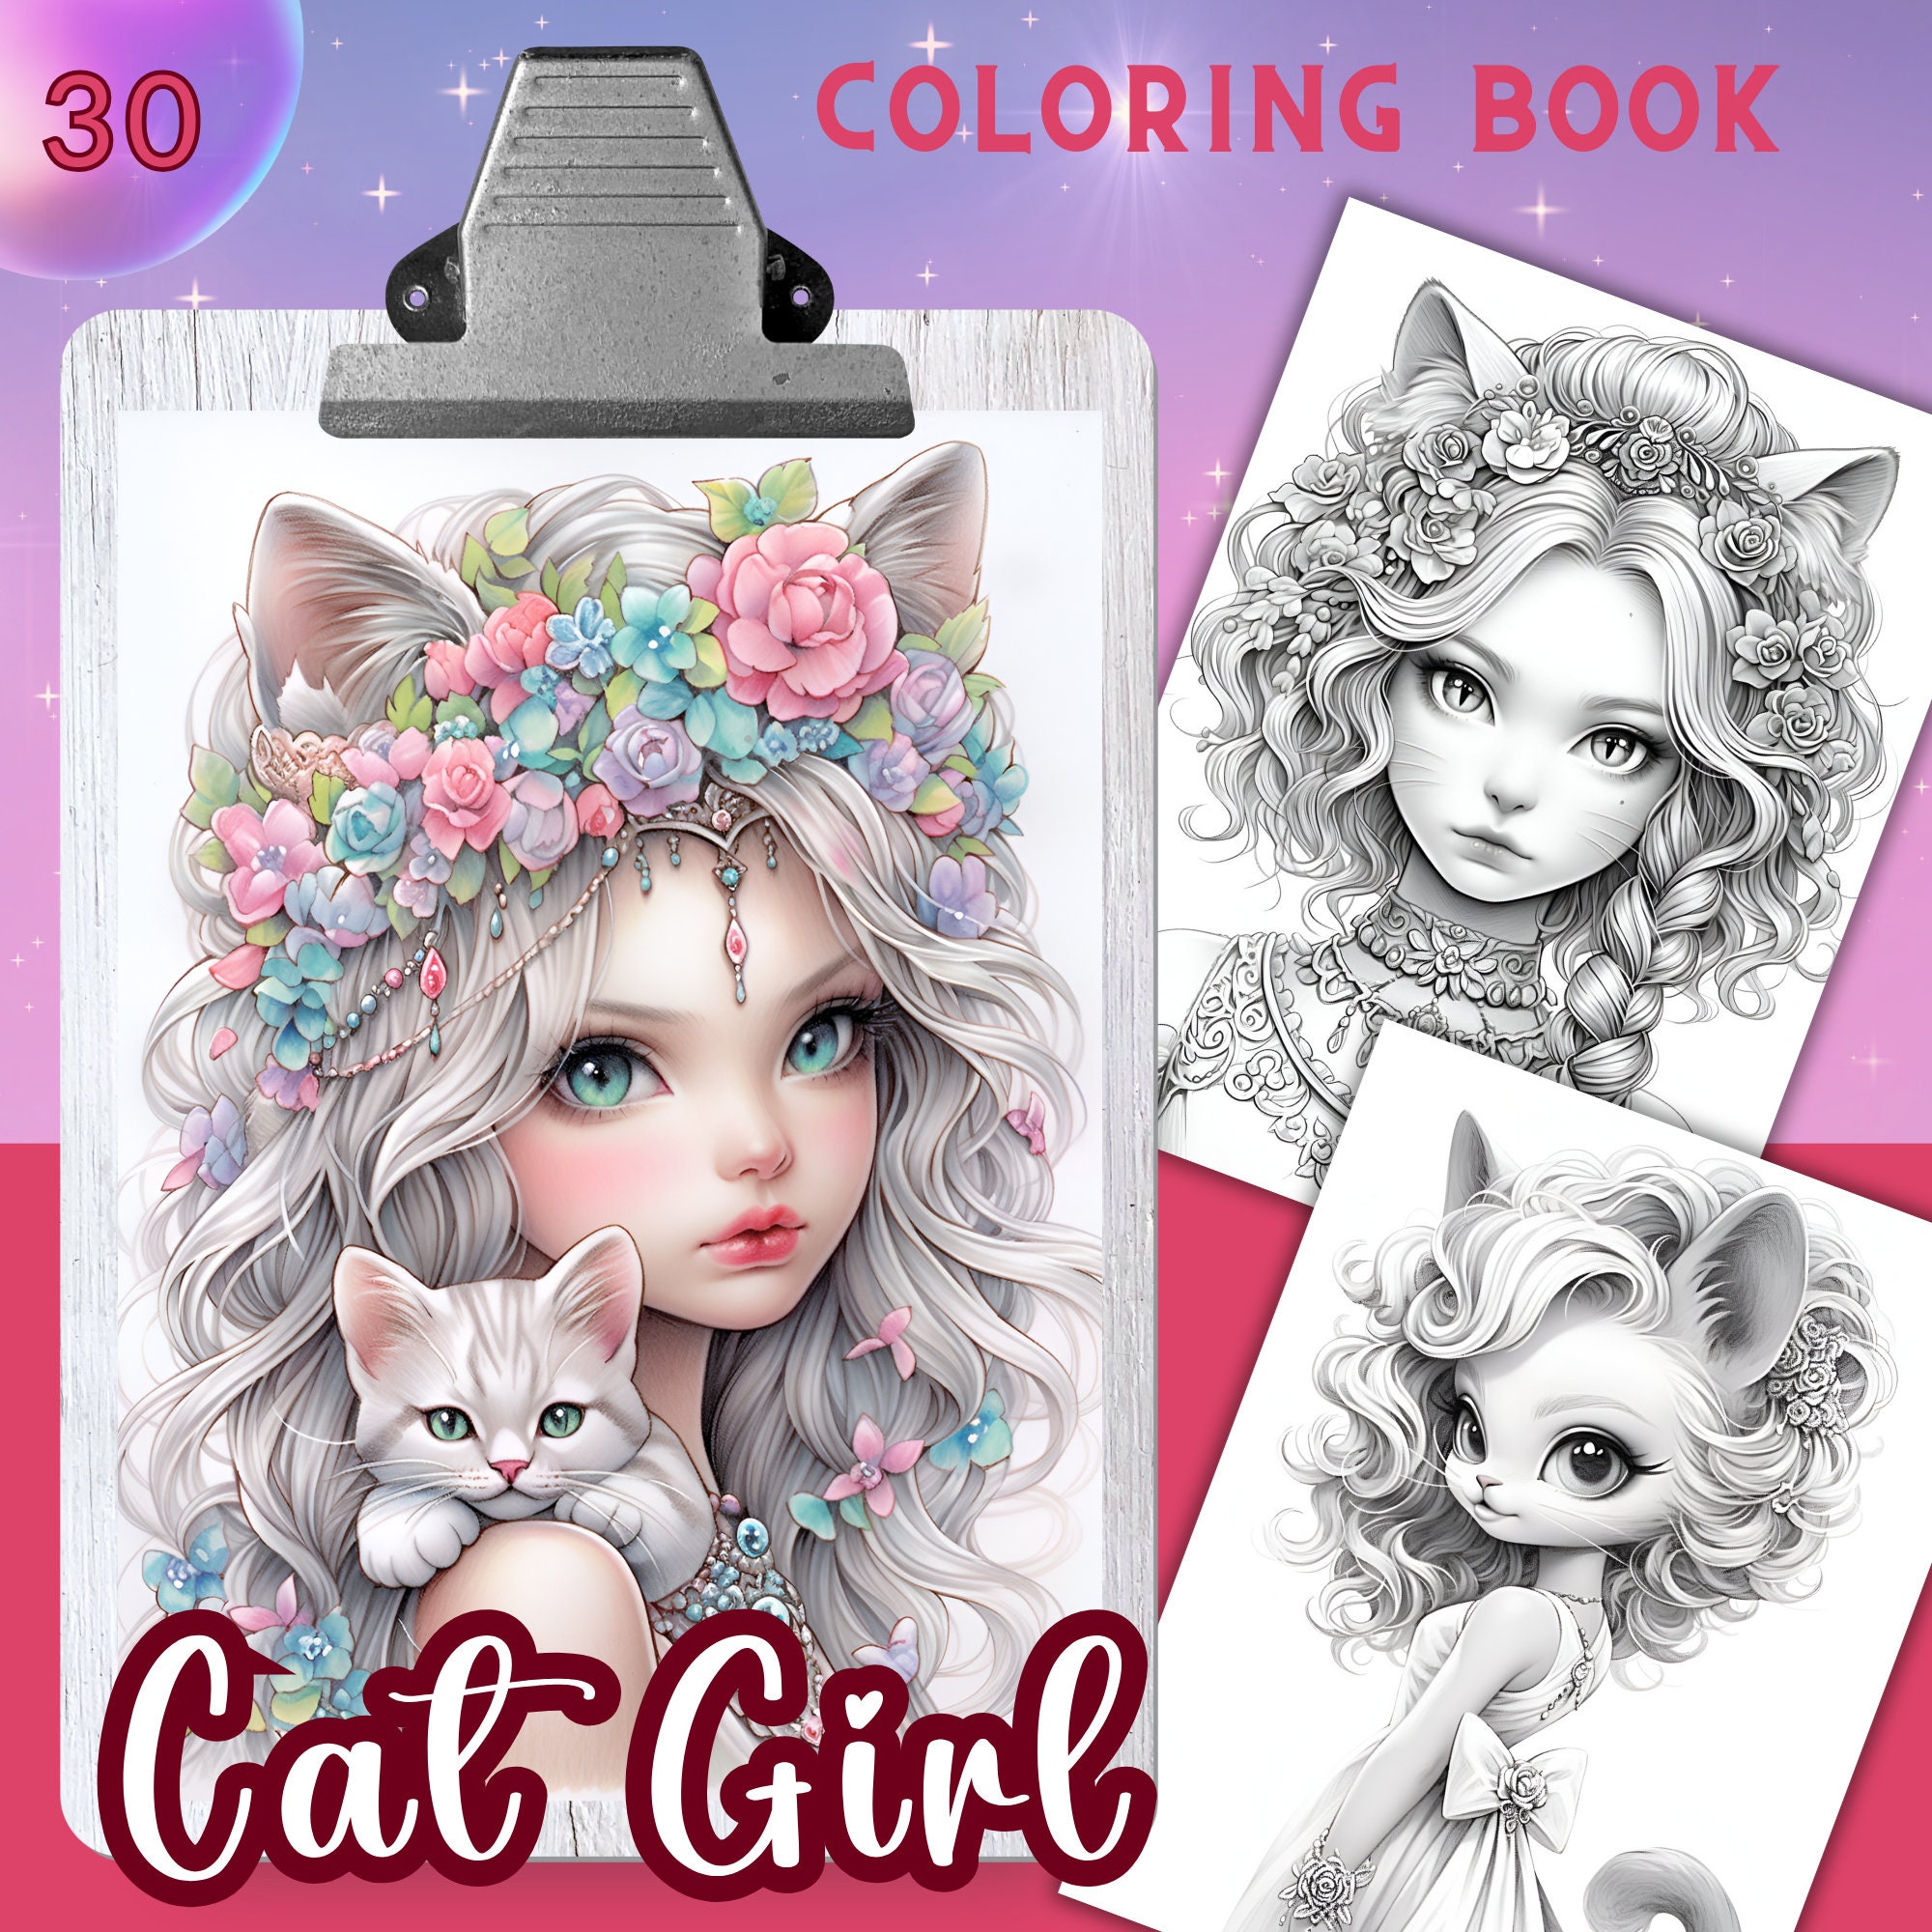 Anime Neko Cat Girls Coloring Book 70 Page Manga Fantasy Anime Coloring  Pages for Adults & Children, Instant Download, Printable PDF 